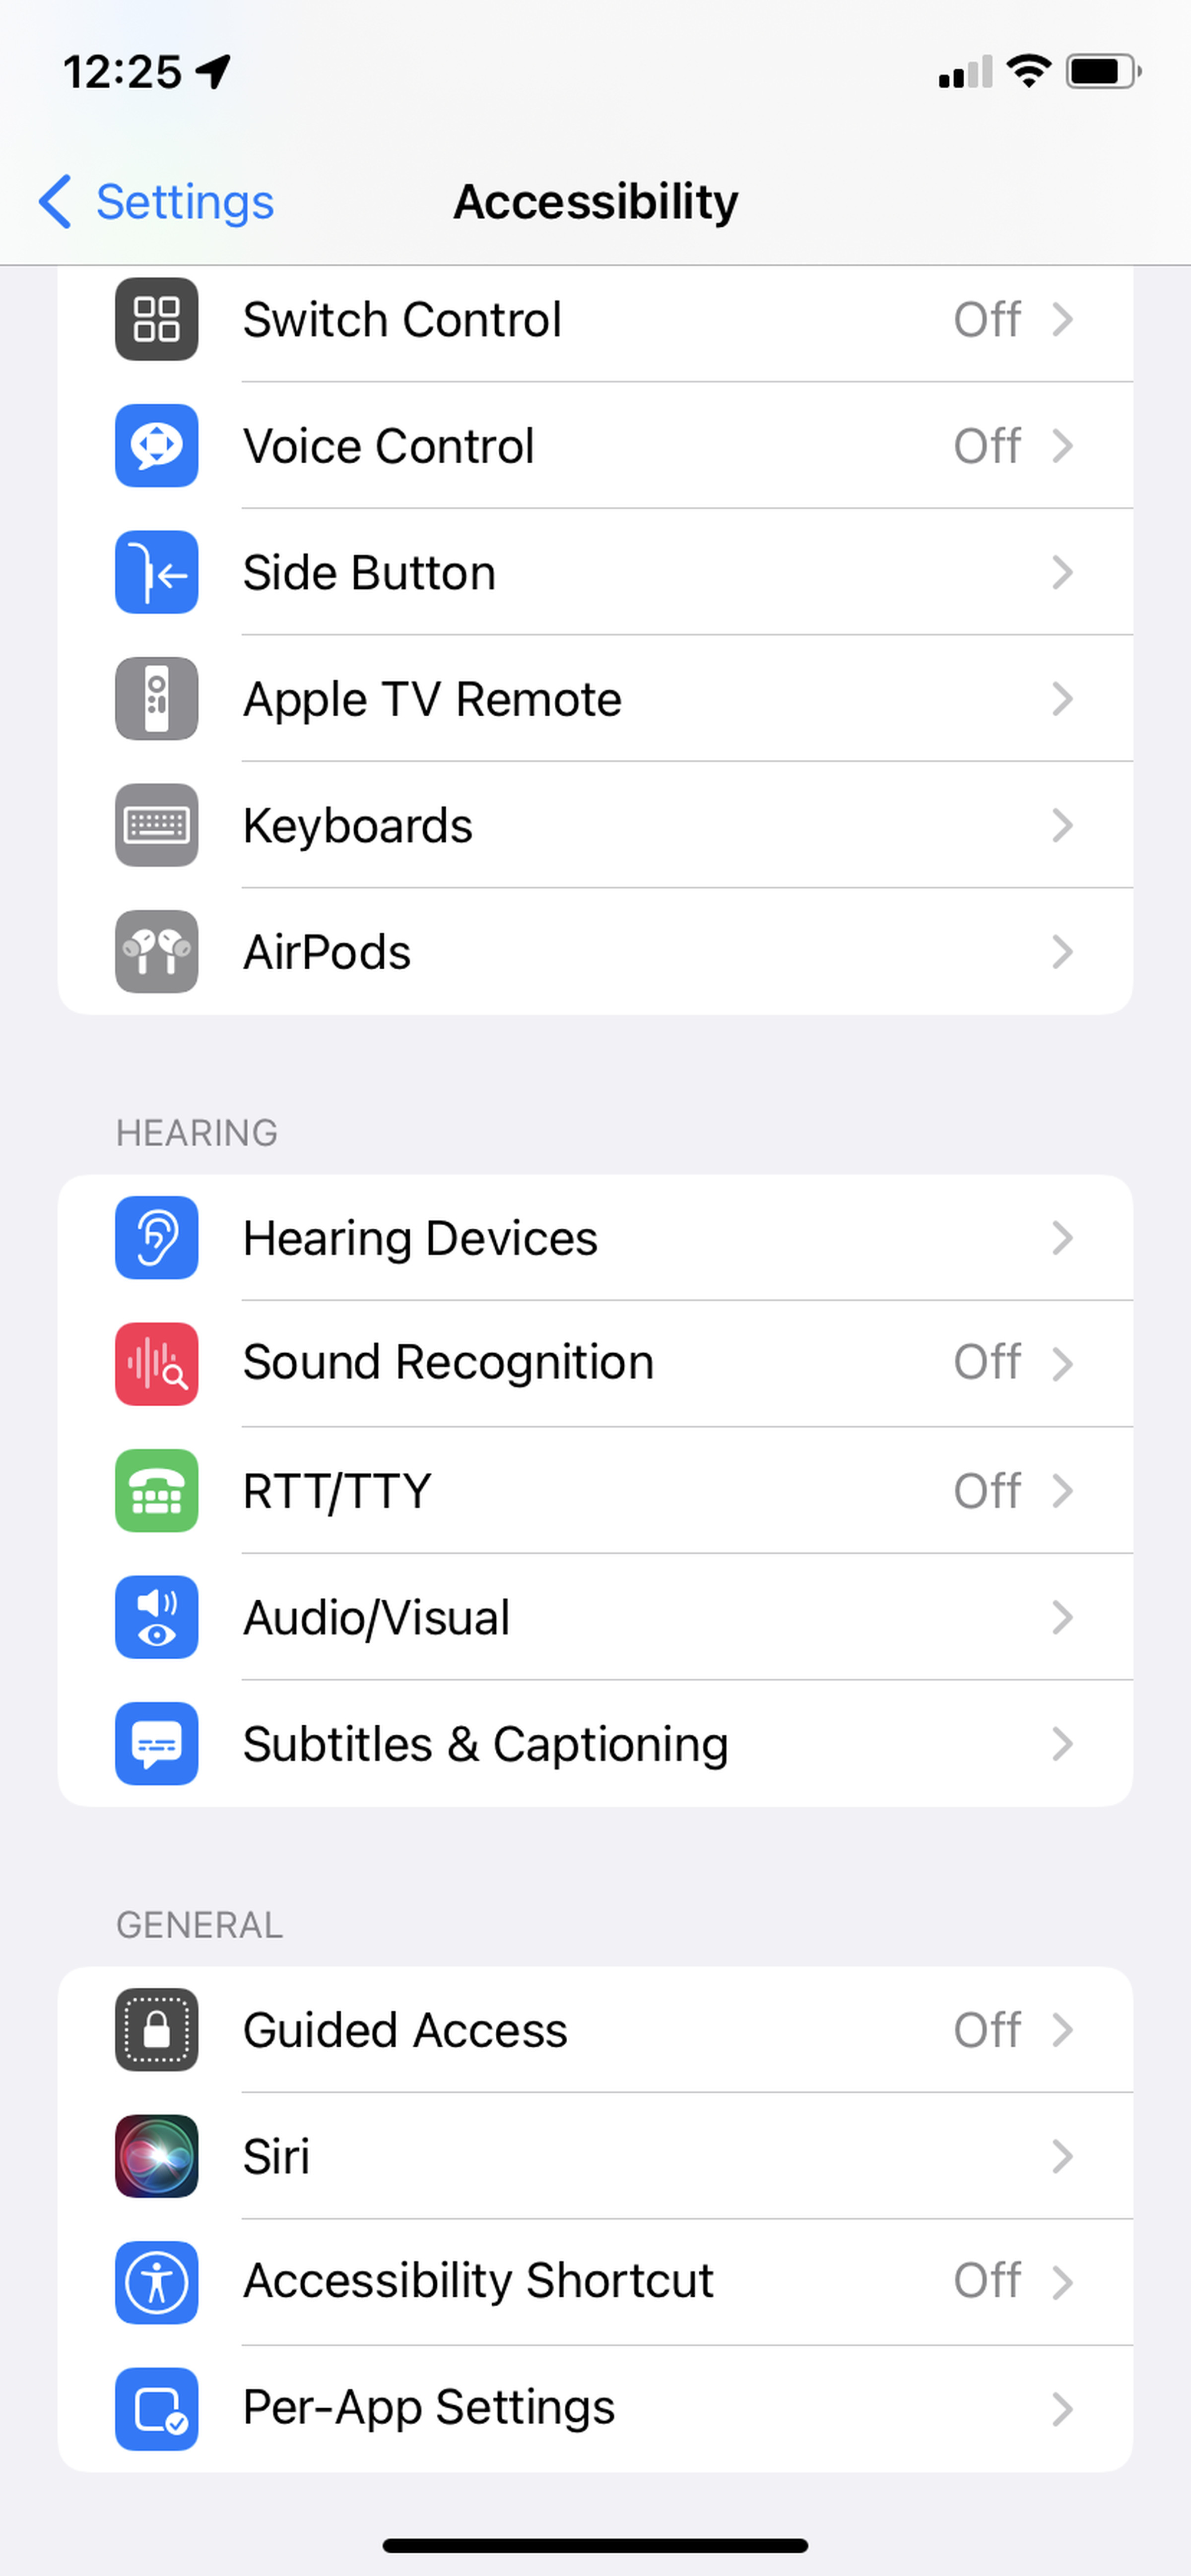 Background Sounds is nested under the Audio/Visual option in your Accessibility settings.